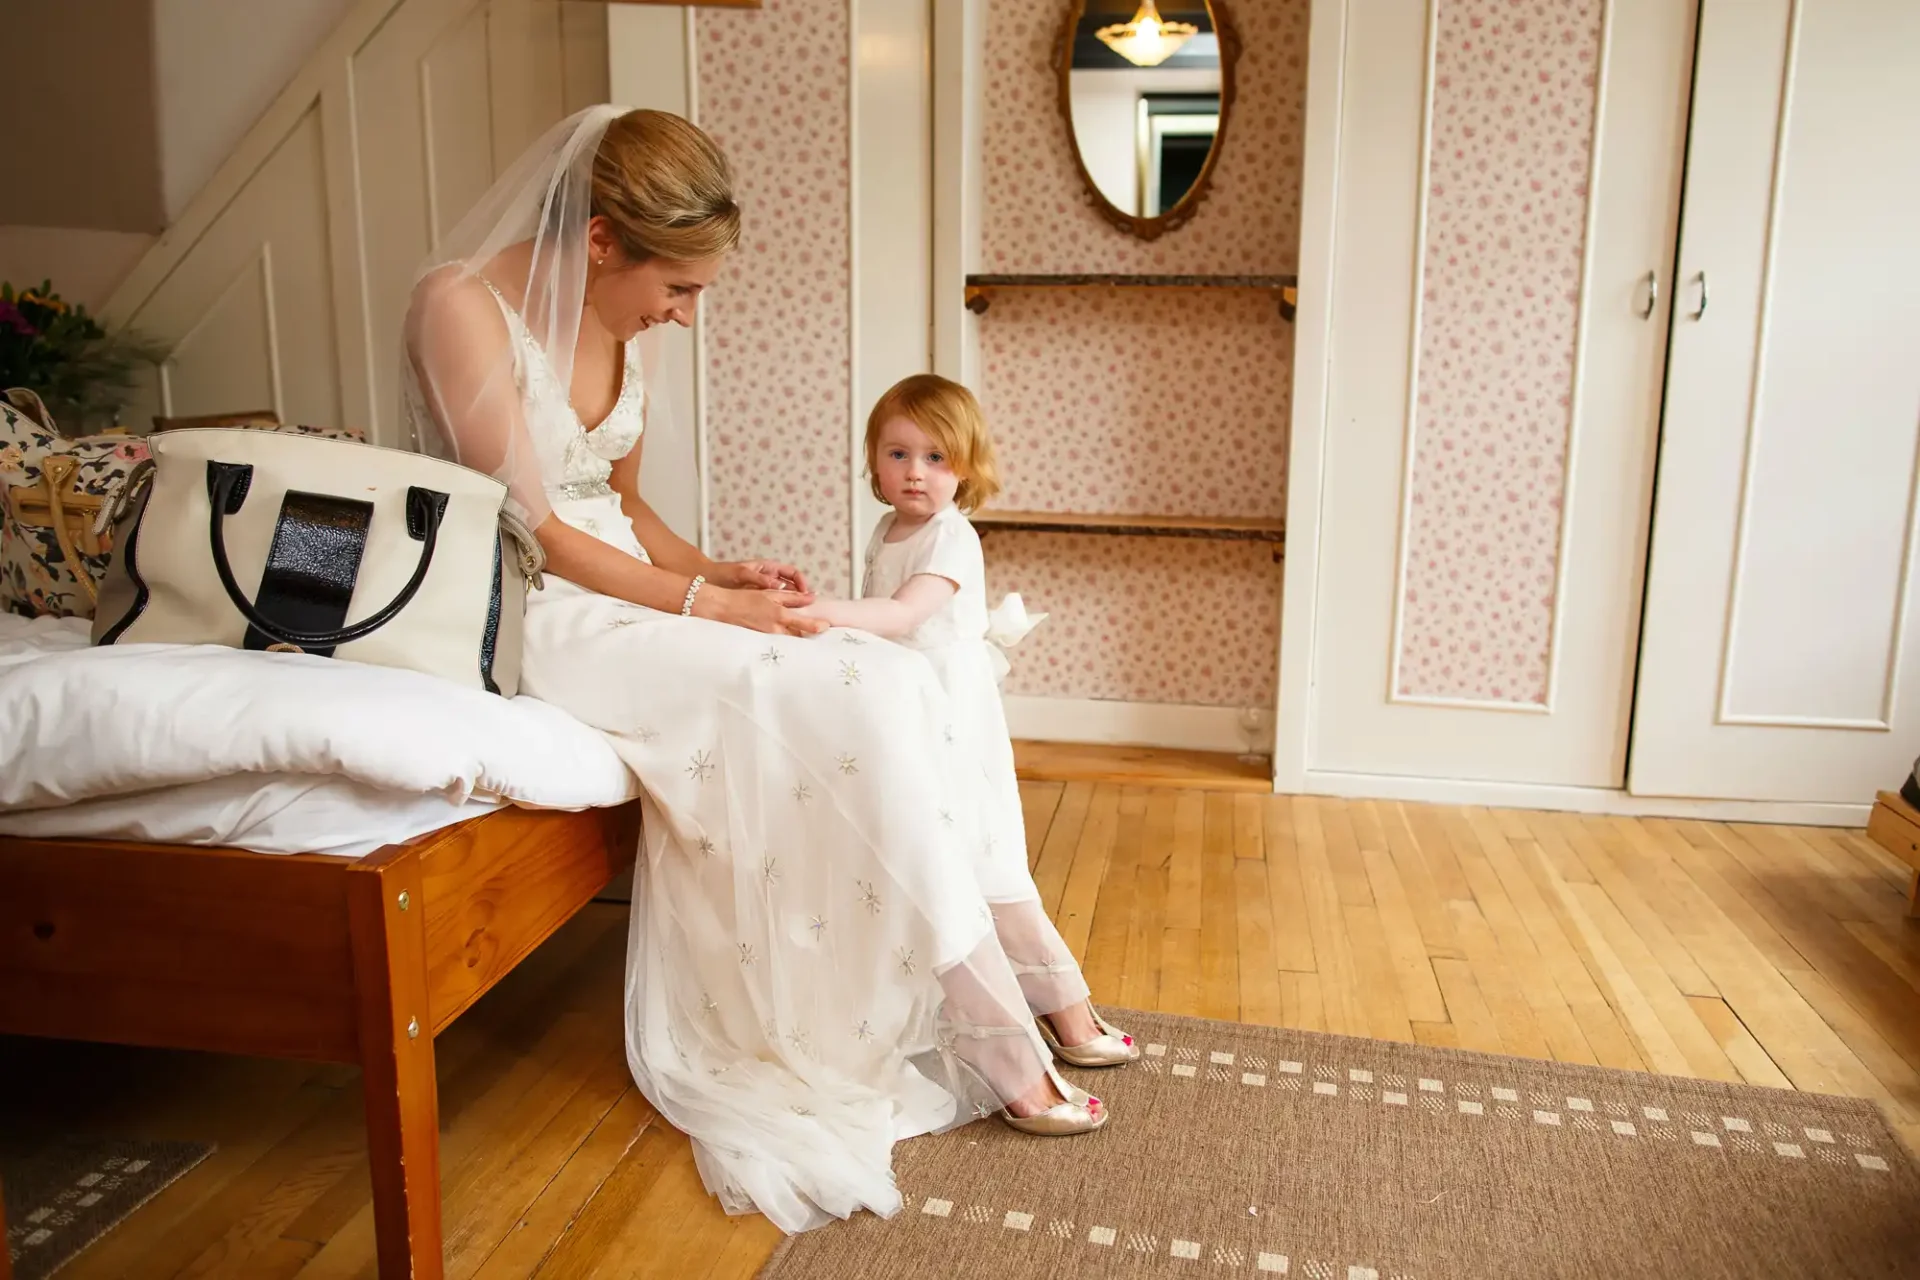 A bride in a white dress sitting and holding hands with a young child in a white dress in a warmly lit room.